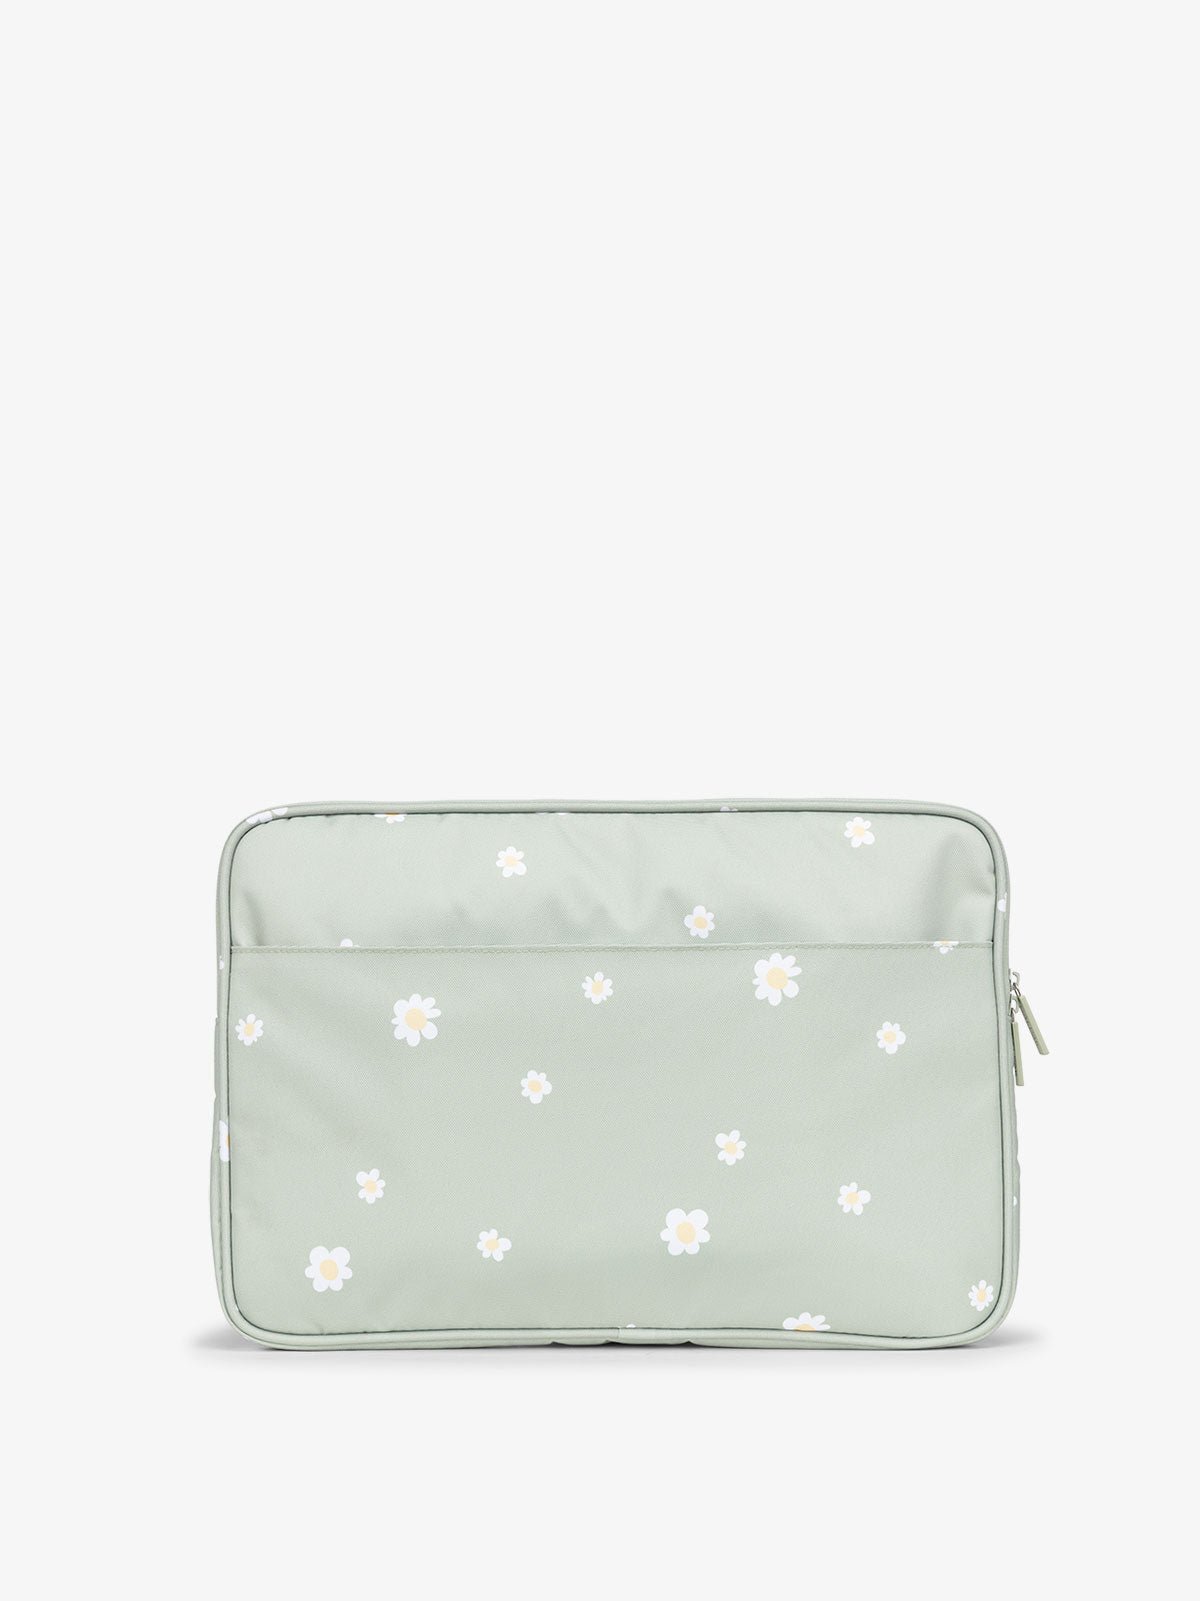 CALPAK 15-17 Inch Laptop case with padded pockets in daisy